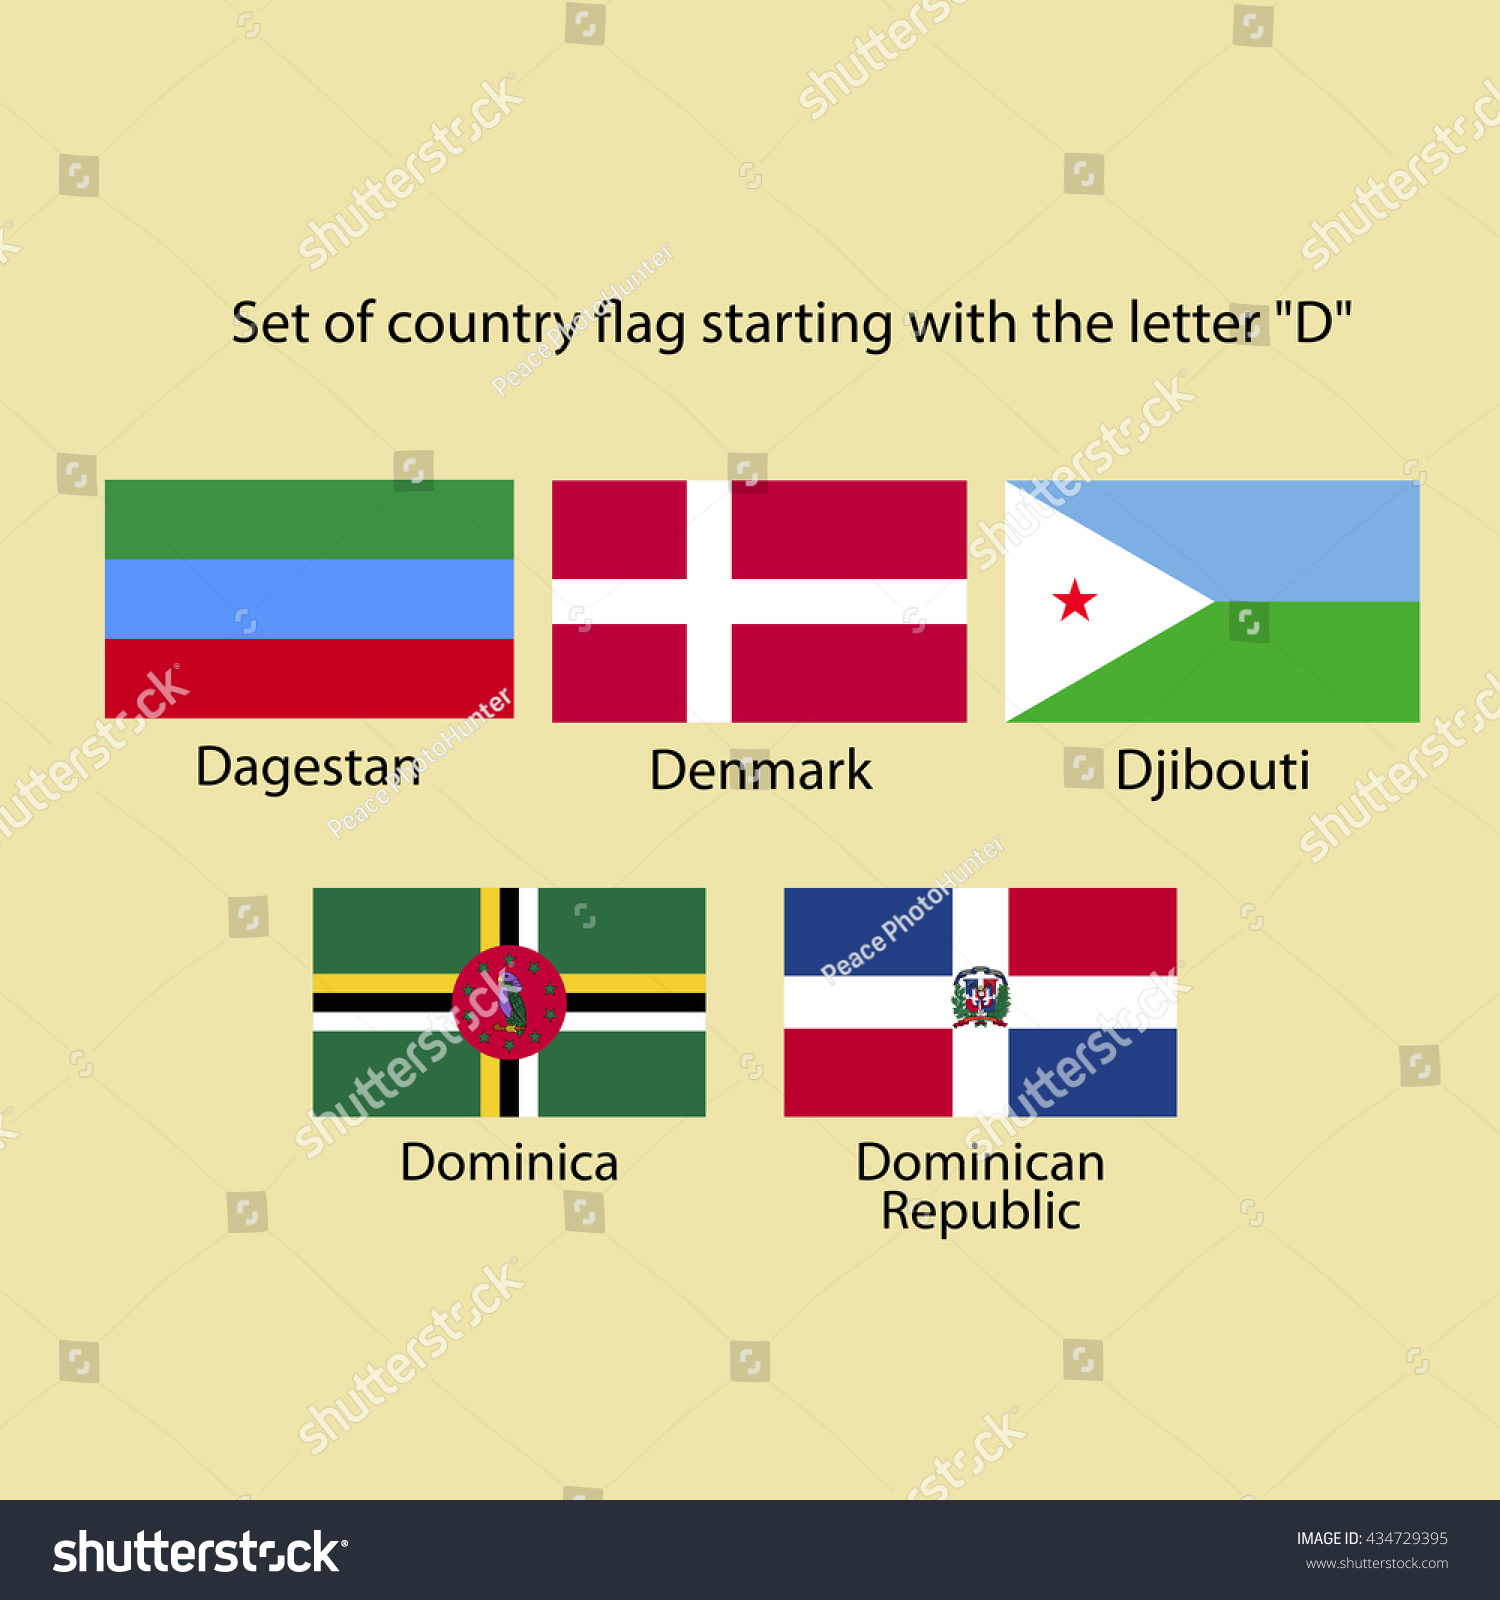 Country Starting With D Letter